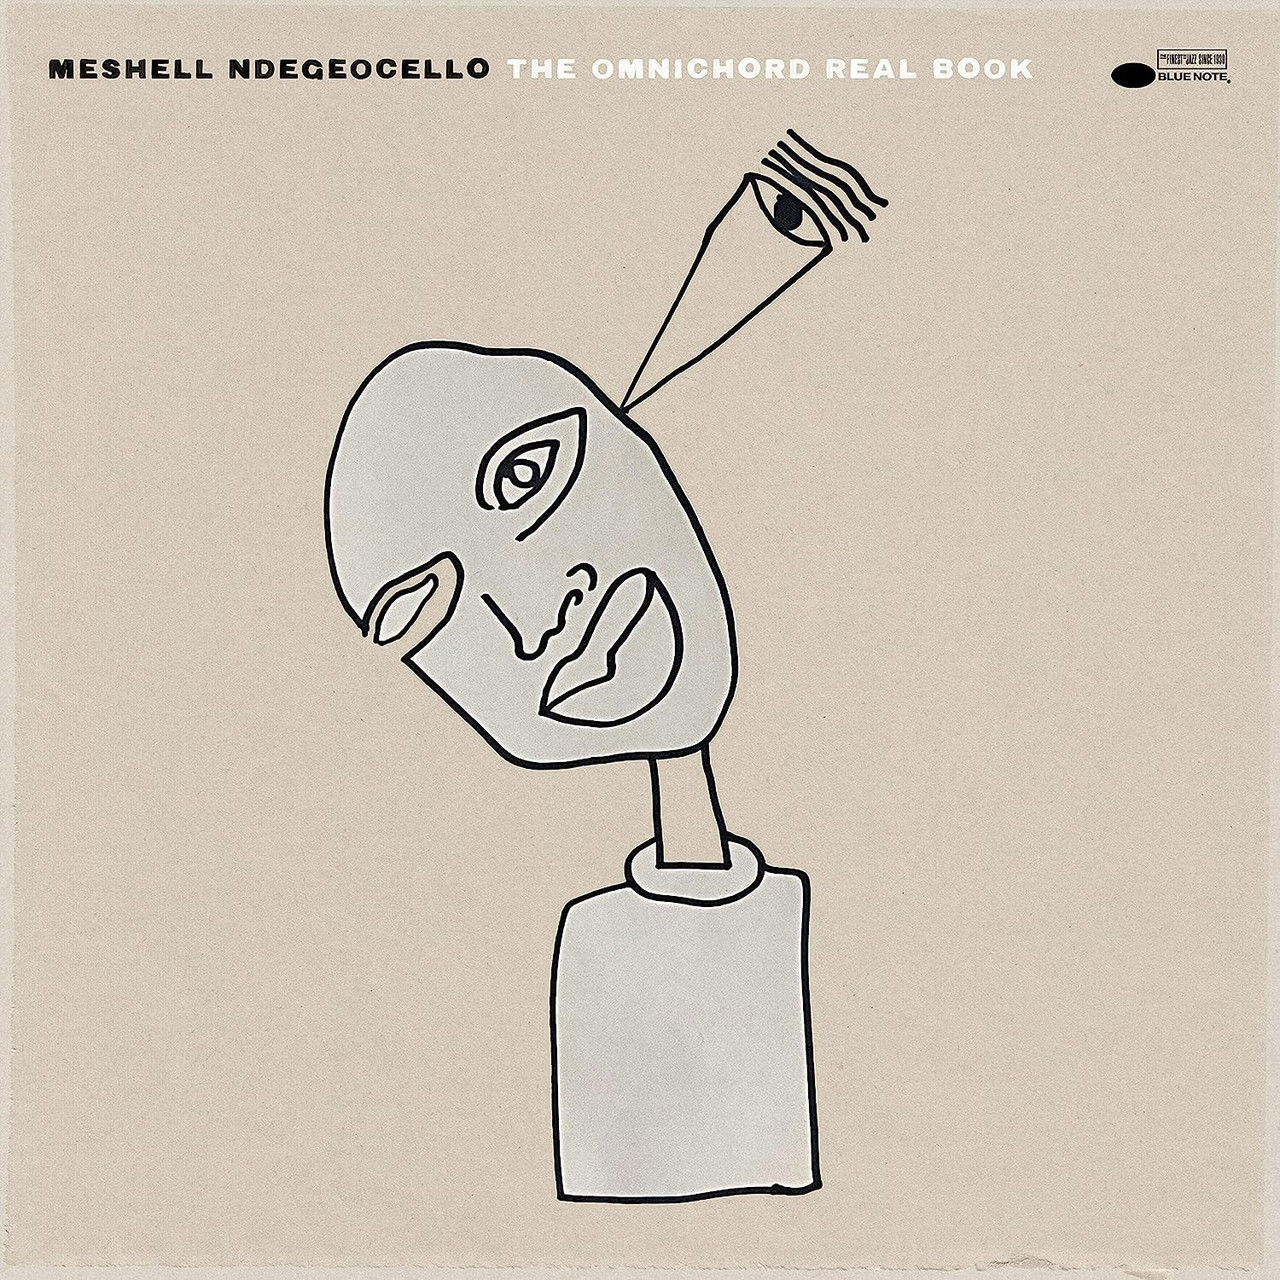 MESHELL NDEGOCELLO - The Omnichord Real Book cover 